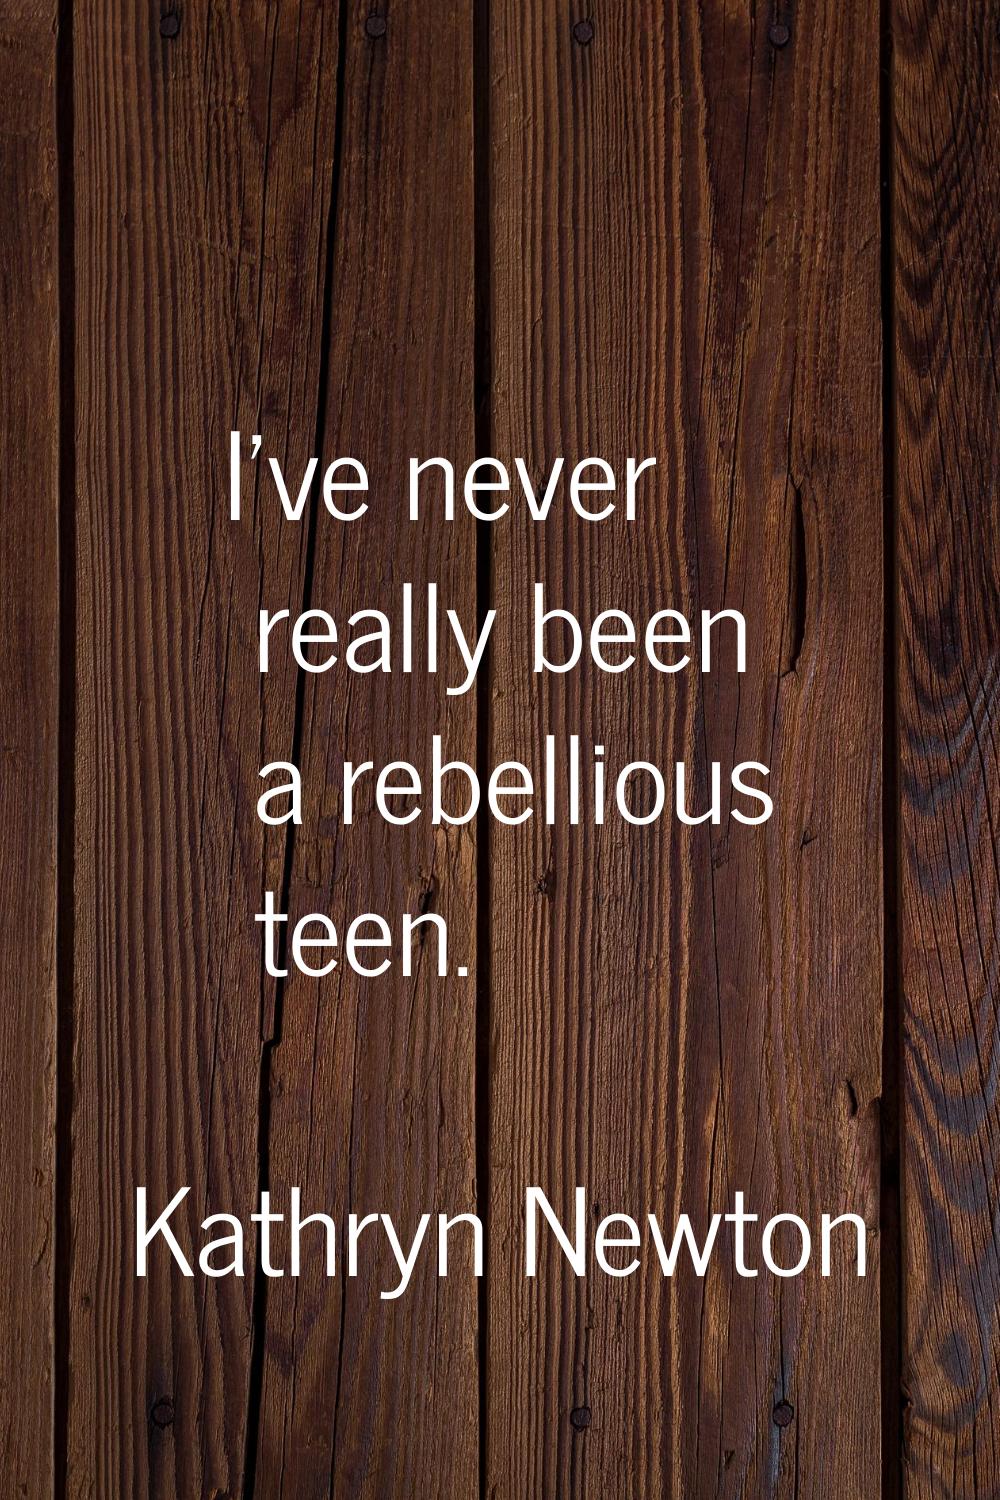 I've never really been a rebellious teen.